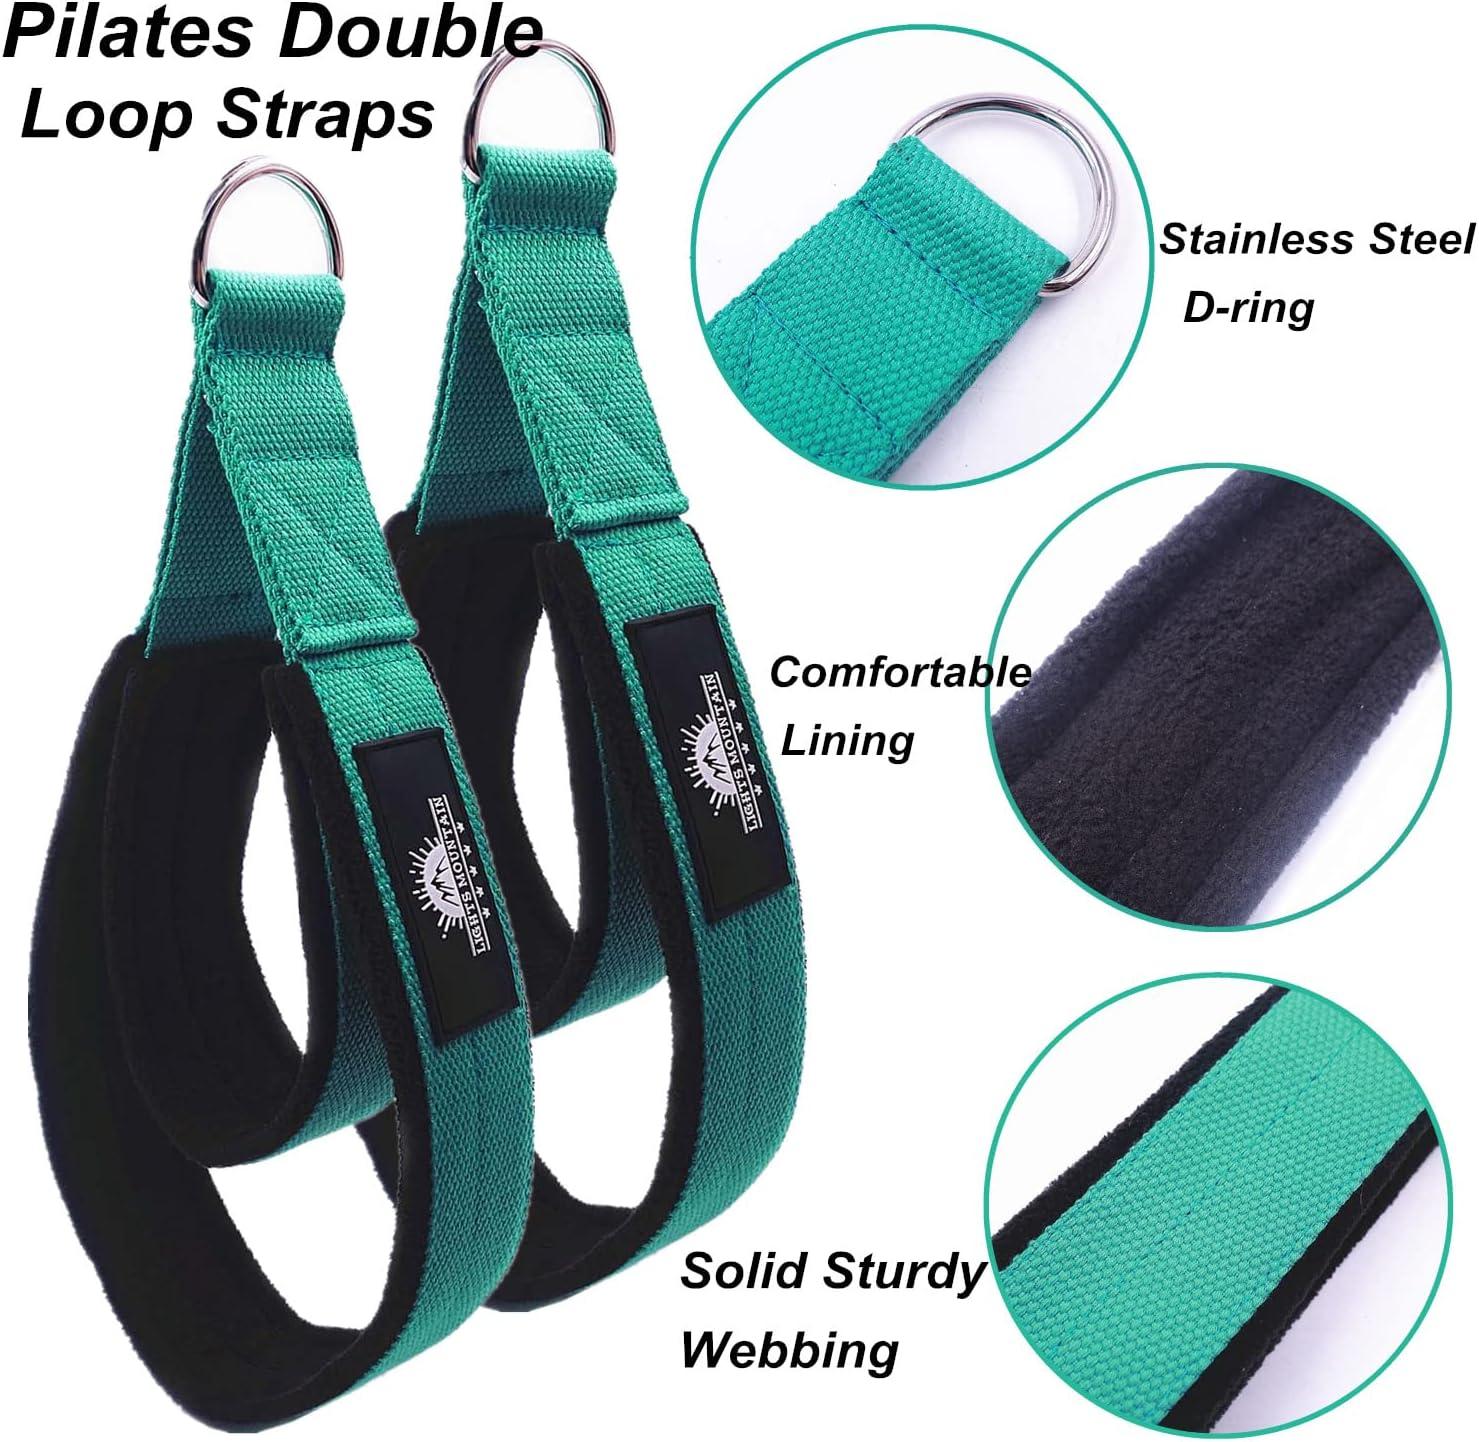 Lights Mountain 1 Pair Pilates Double Loop Straps for Reformer Fitness  D-Ring Straps Handle, Yoga Exercise Accessories for Home Gym Workout  lakegreen size M